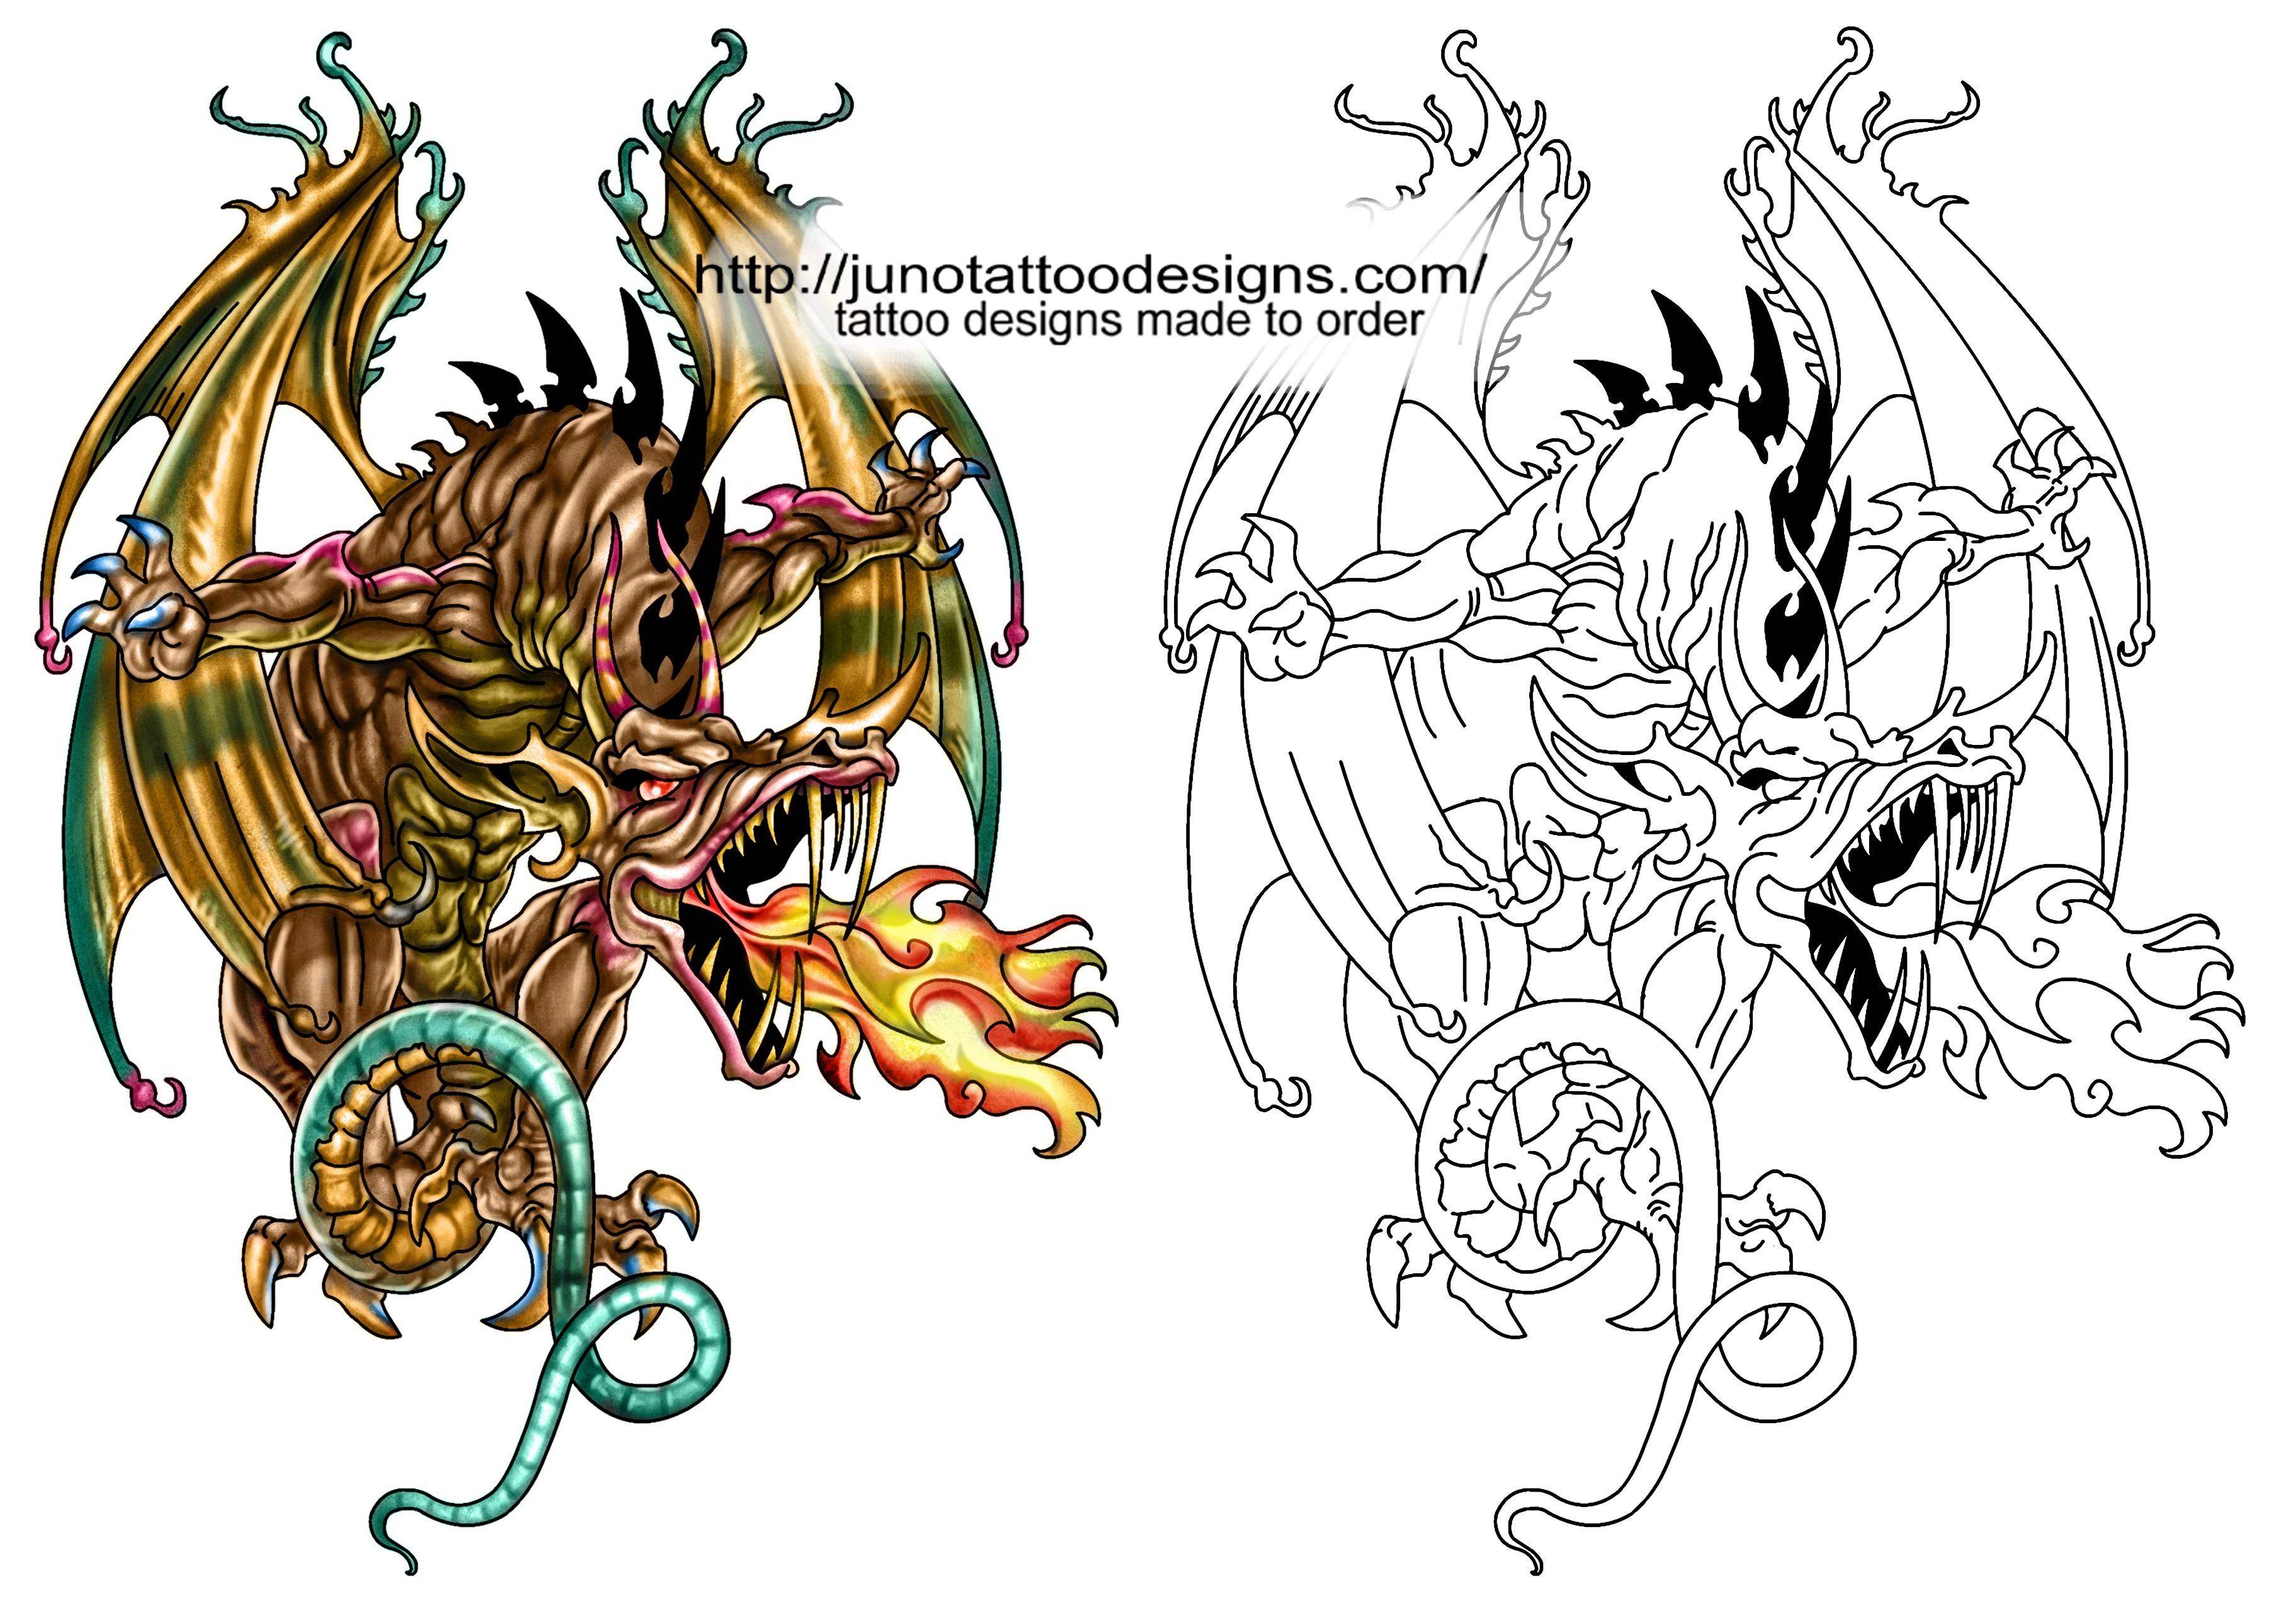 Free Tattoo Designs And Stencils Custom Tattoos Made To Order By Template